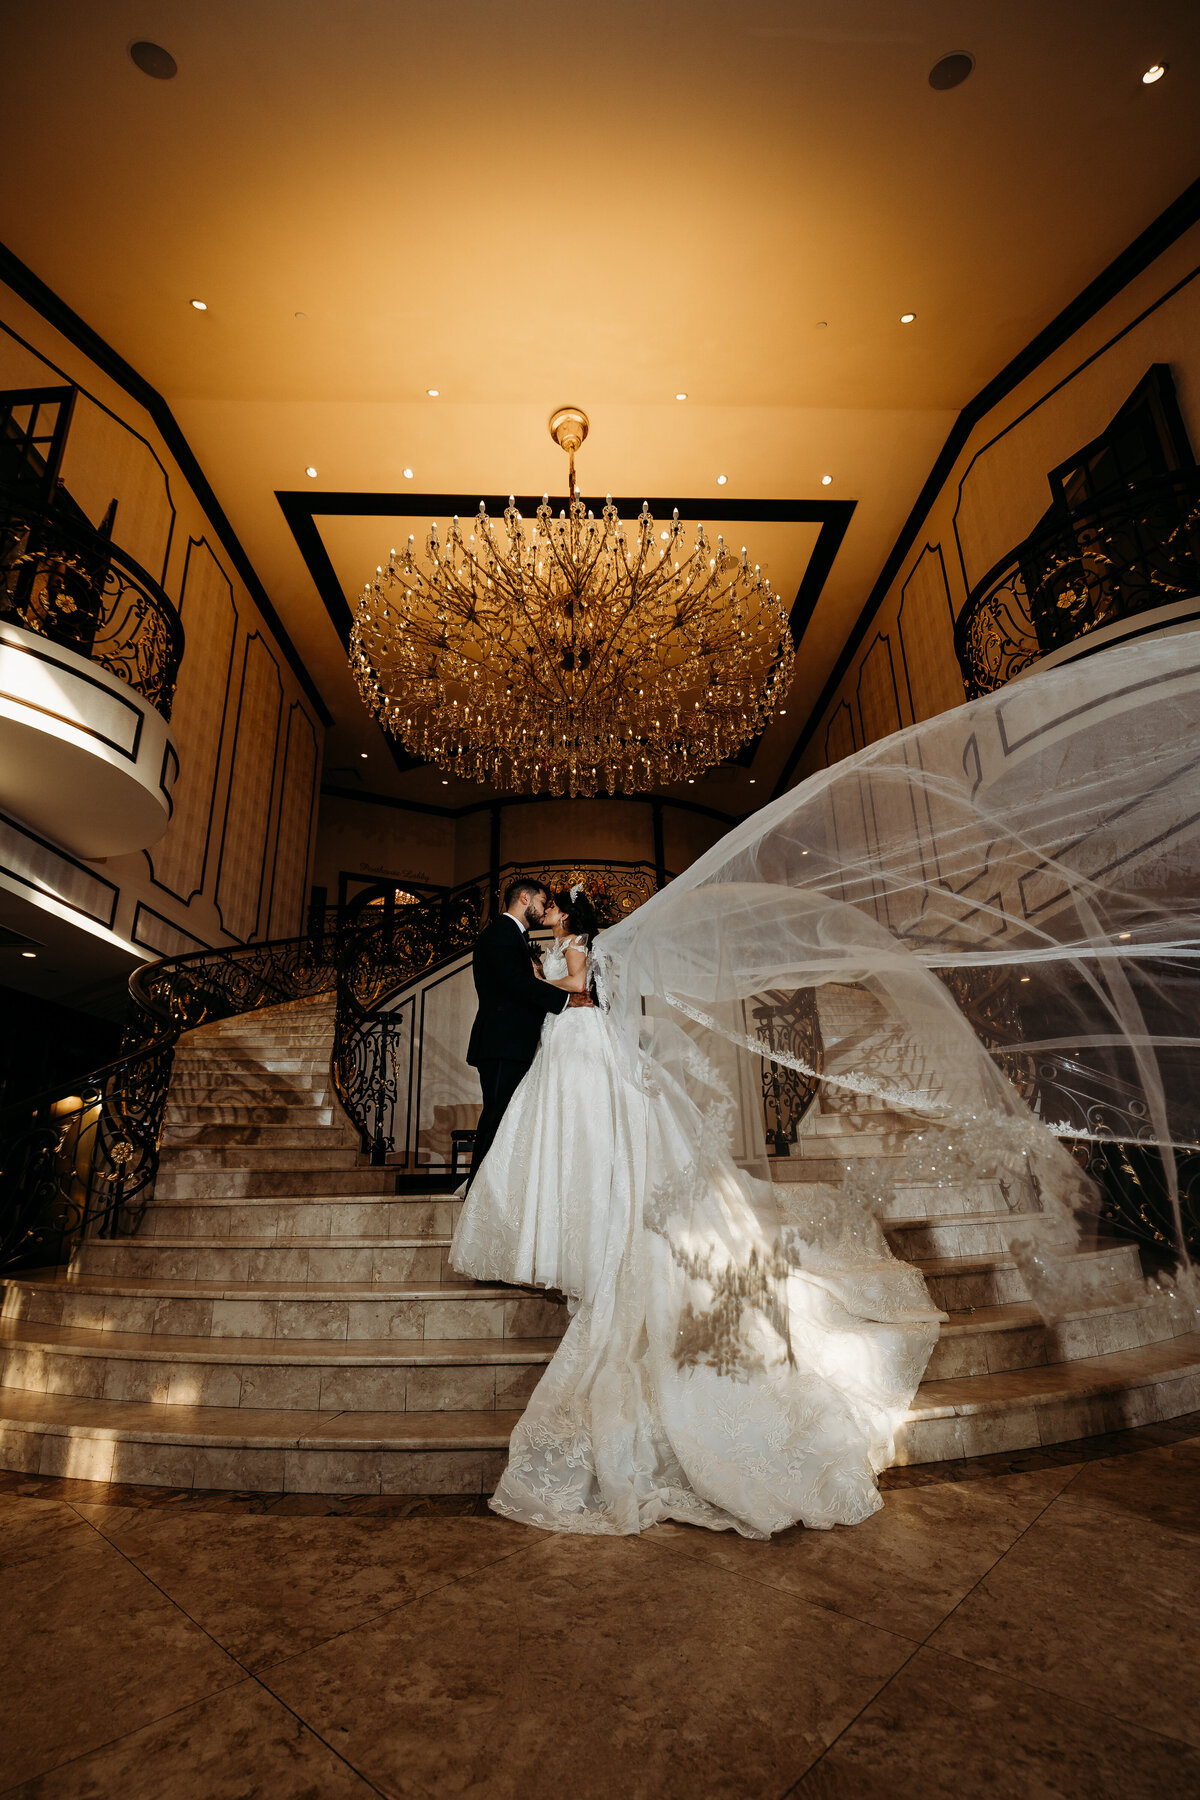 Bride and groom embrace on grand staircase as veil blows dramatically